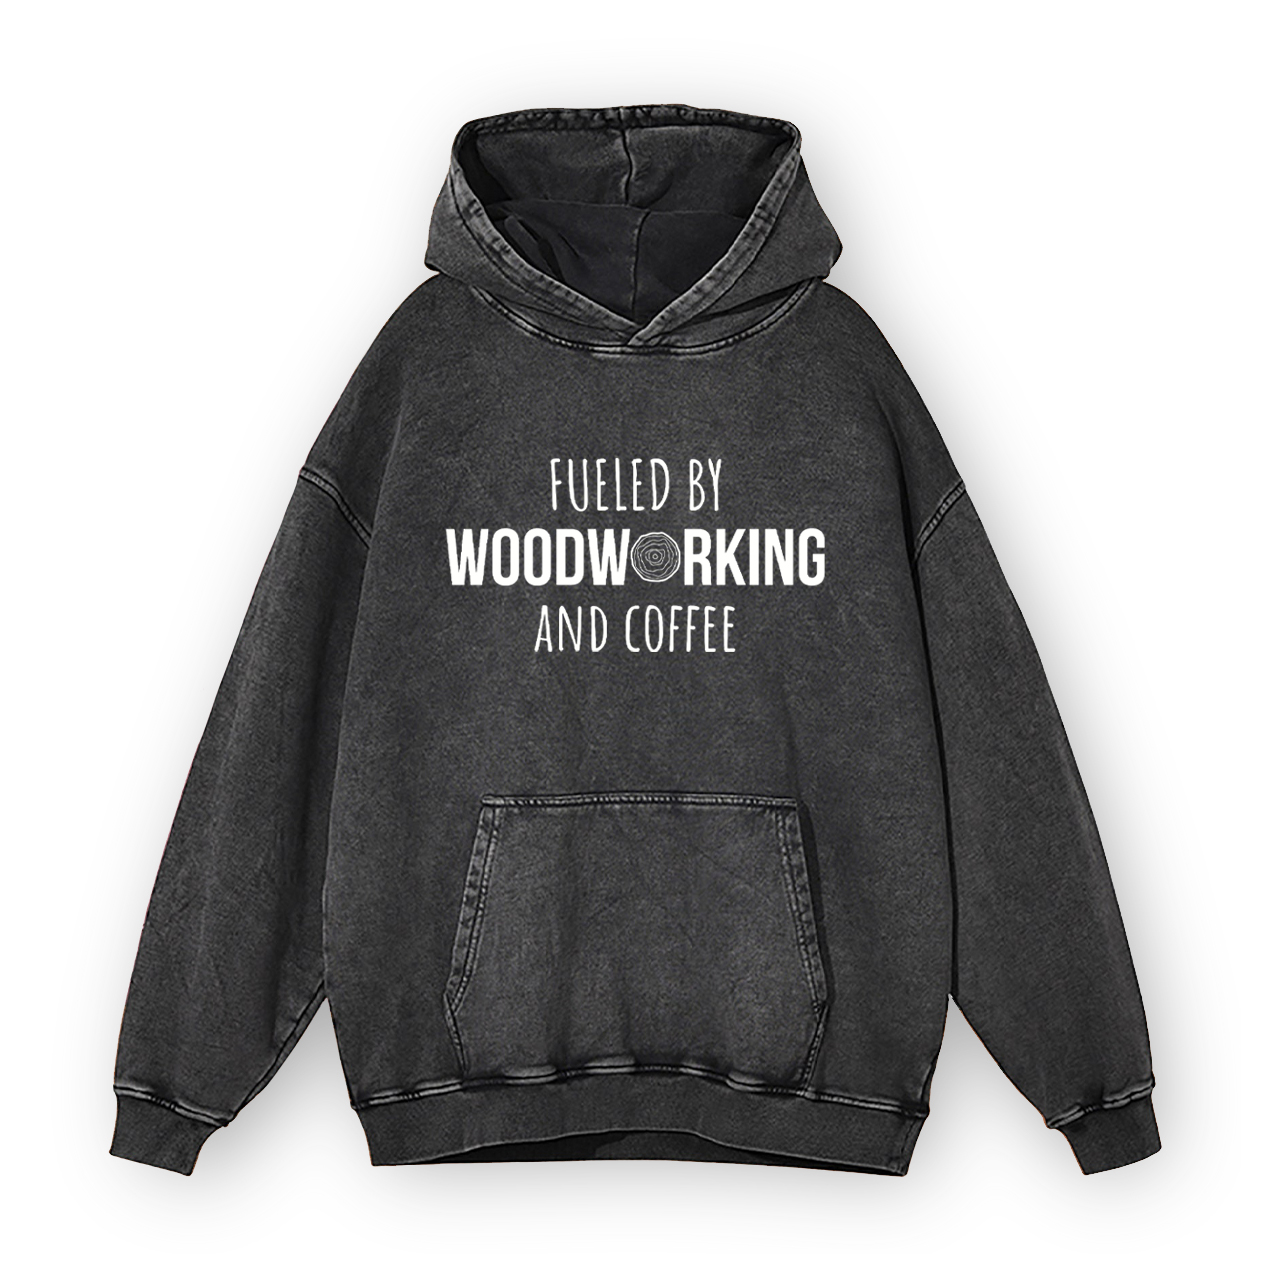 Fueled By Woodw Rking and Coffee Garment-Dye Hoodies